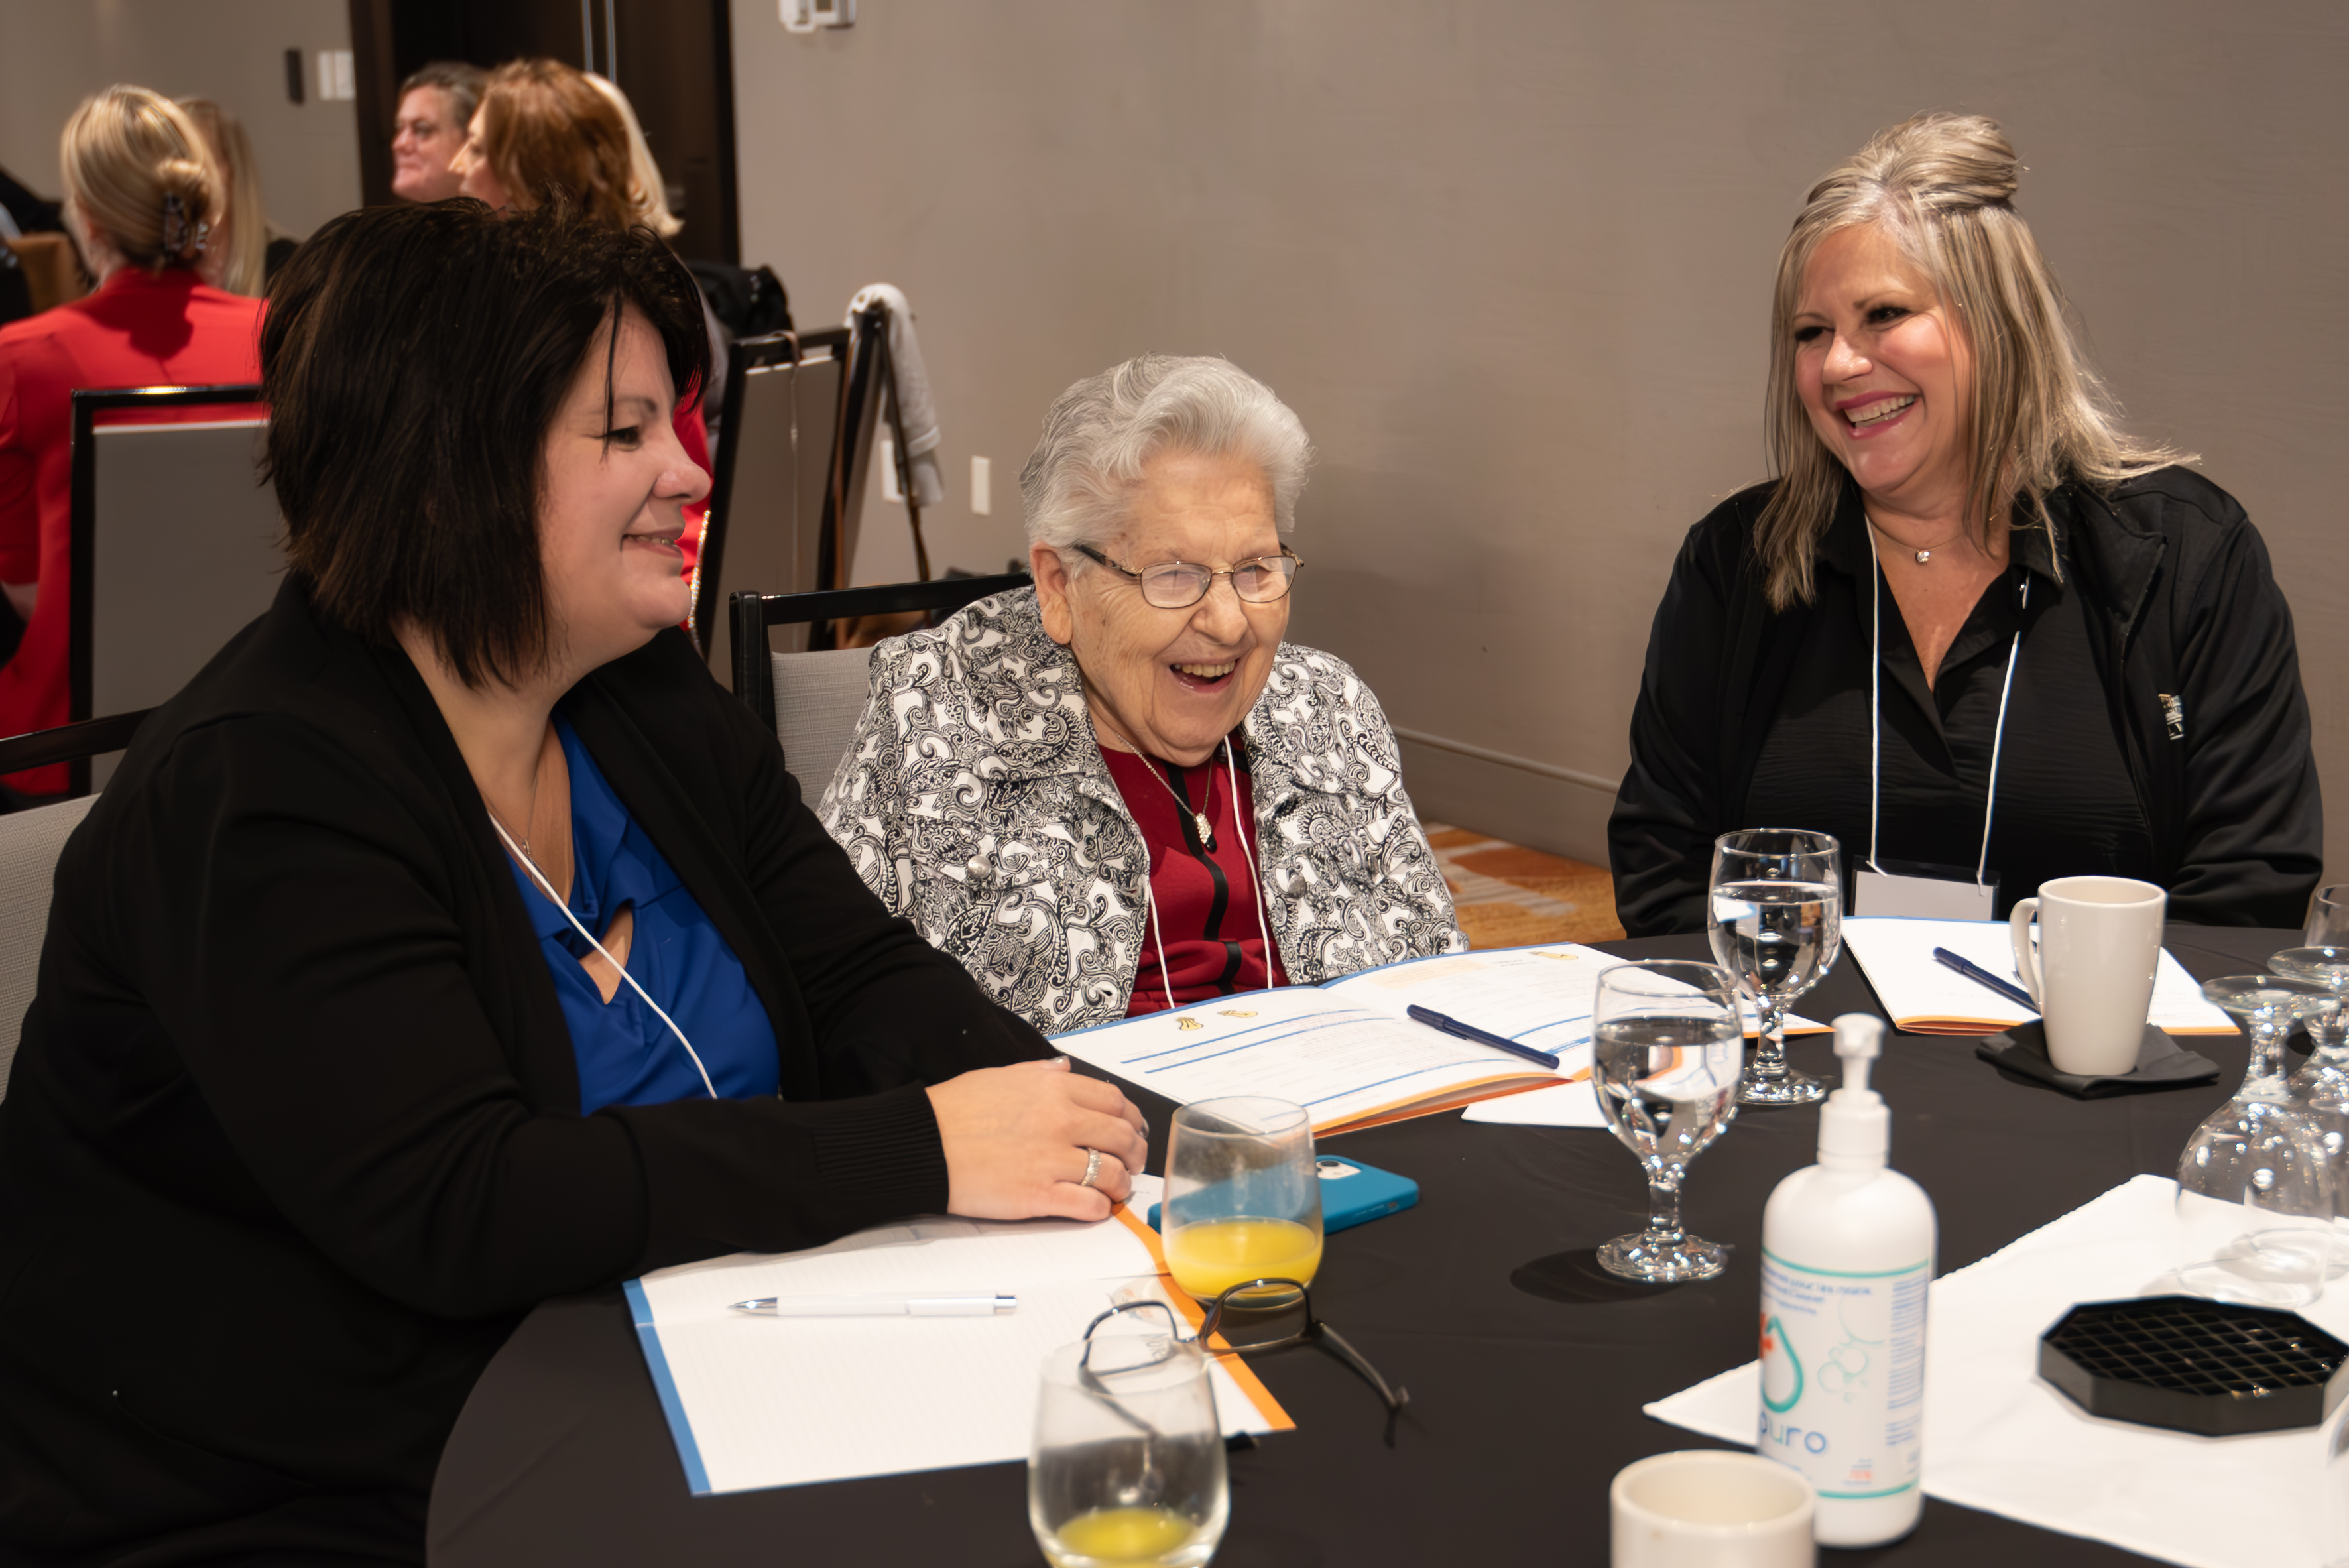 A Schlegel Villages residents is joined by two team members during the annual Innovation Summit.